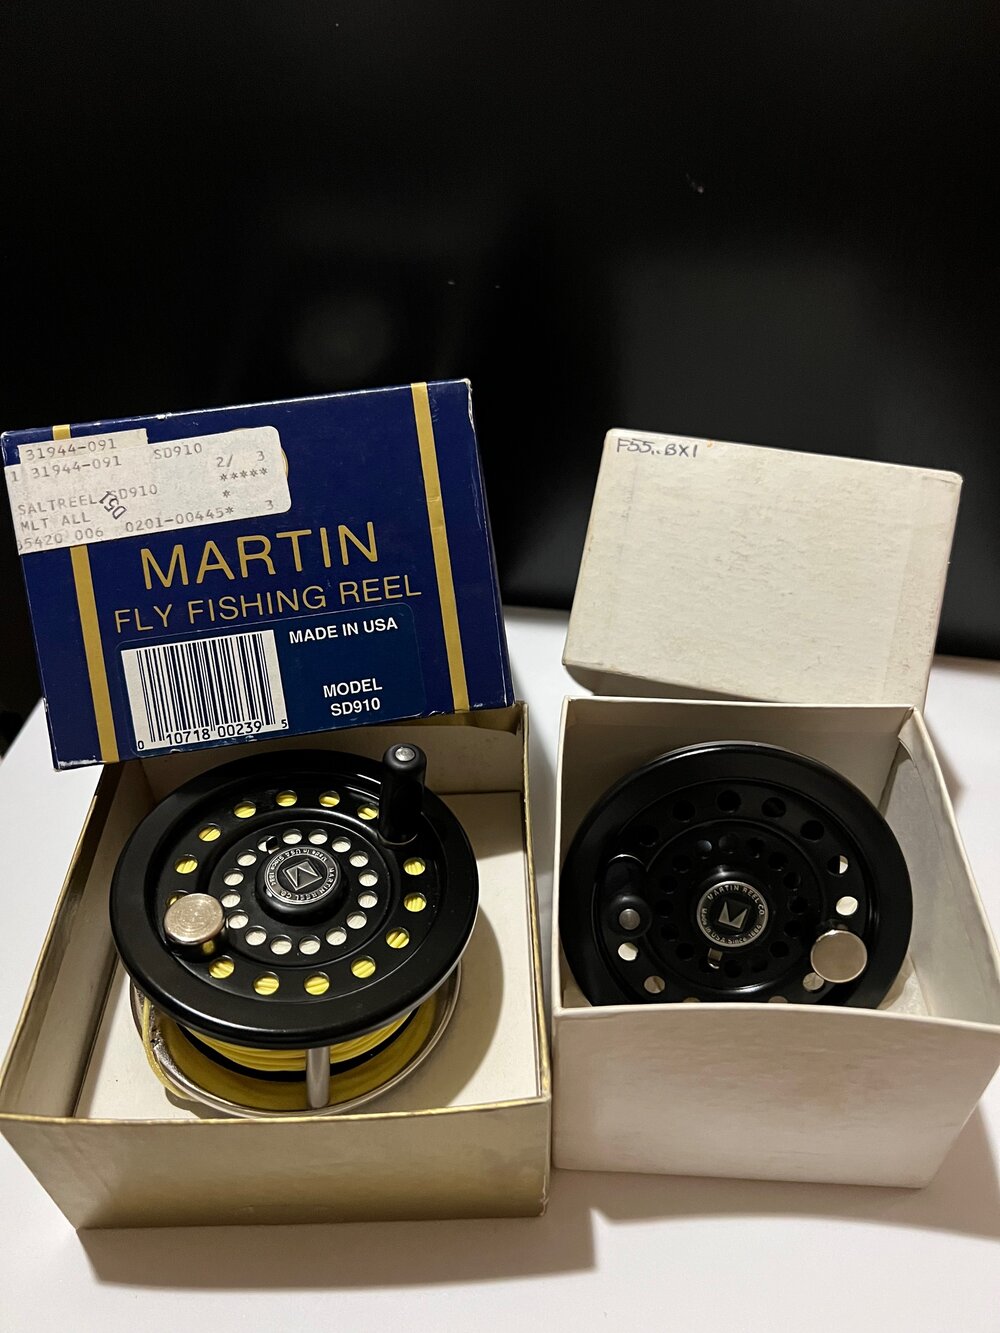 Martin Trophy SD-910 Fly fishing Reel & Extra Spool both with Original  Boxes Mohawk New York — VINTAGE FISHING REELS